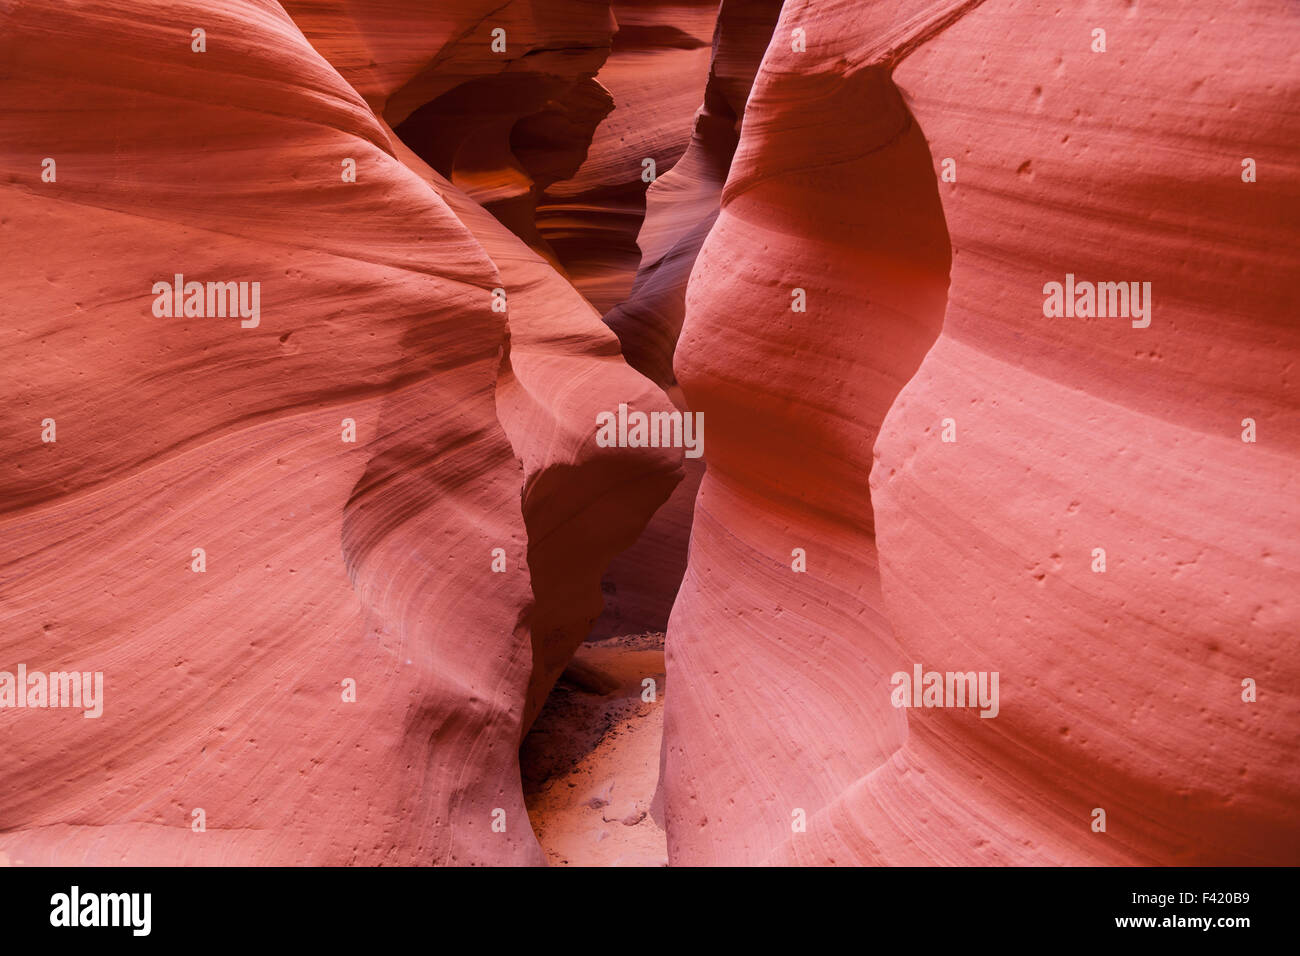 The beautifully smooth and colorful sandstone walls of Canyon X located in Page, AZ. Stock Photo